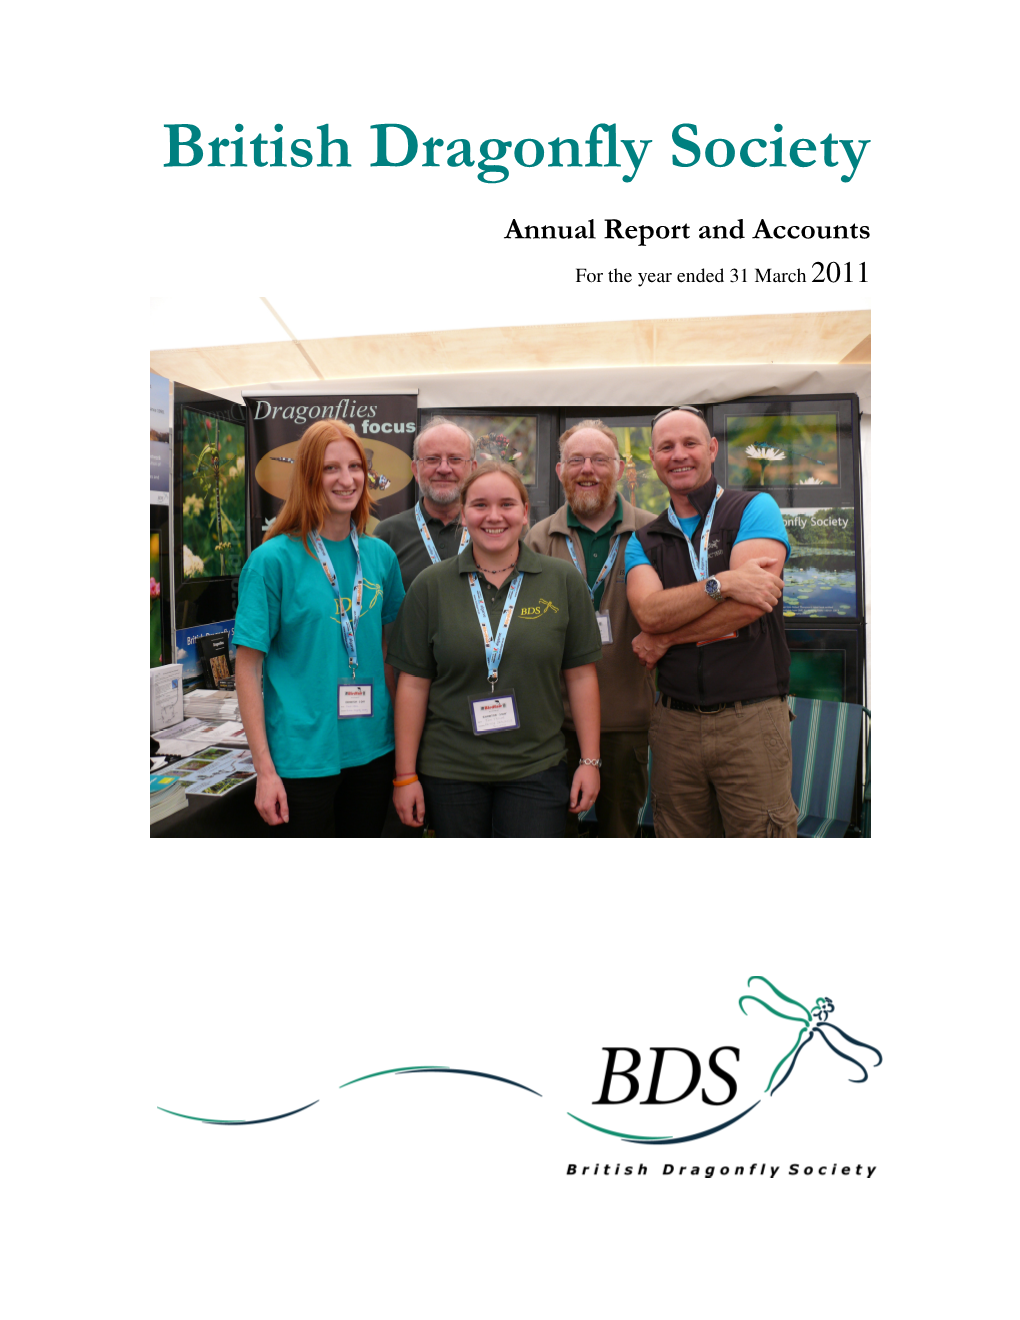 BDS Annual Report 2011